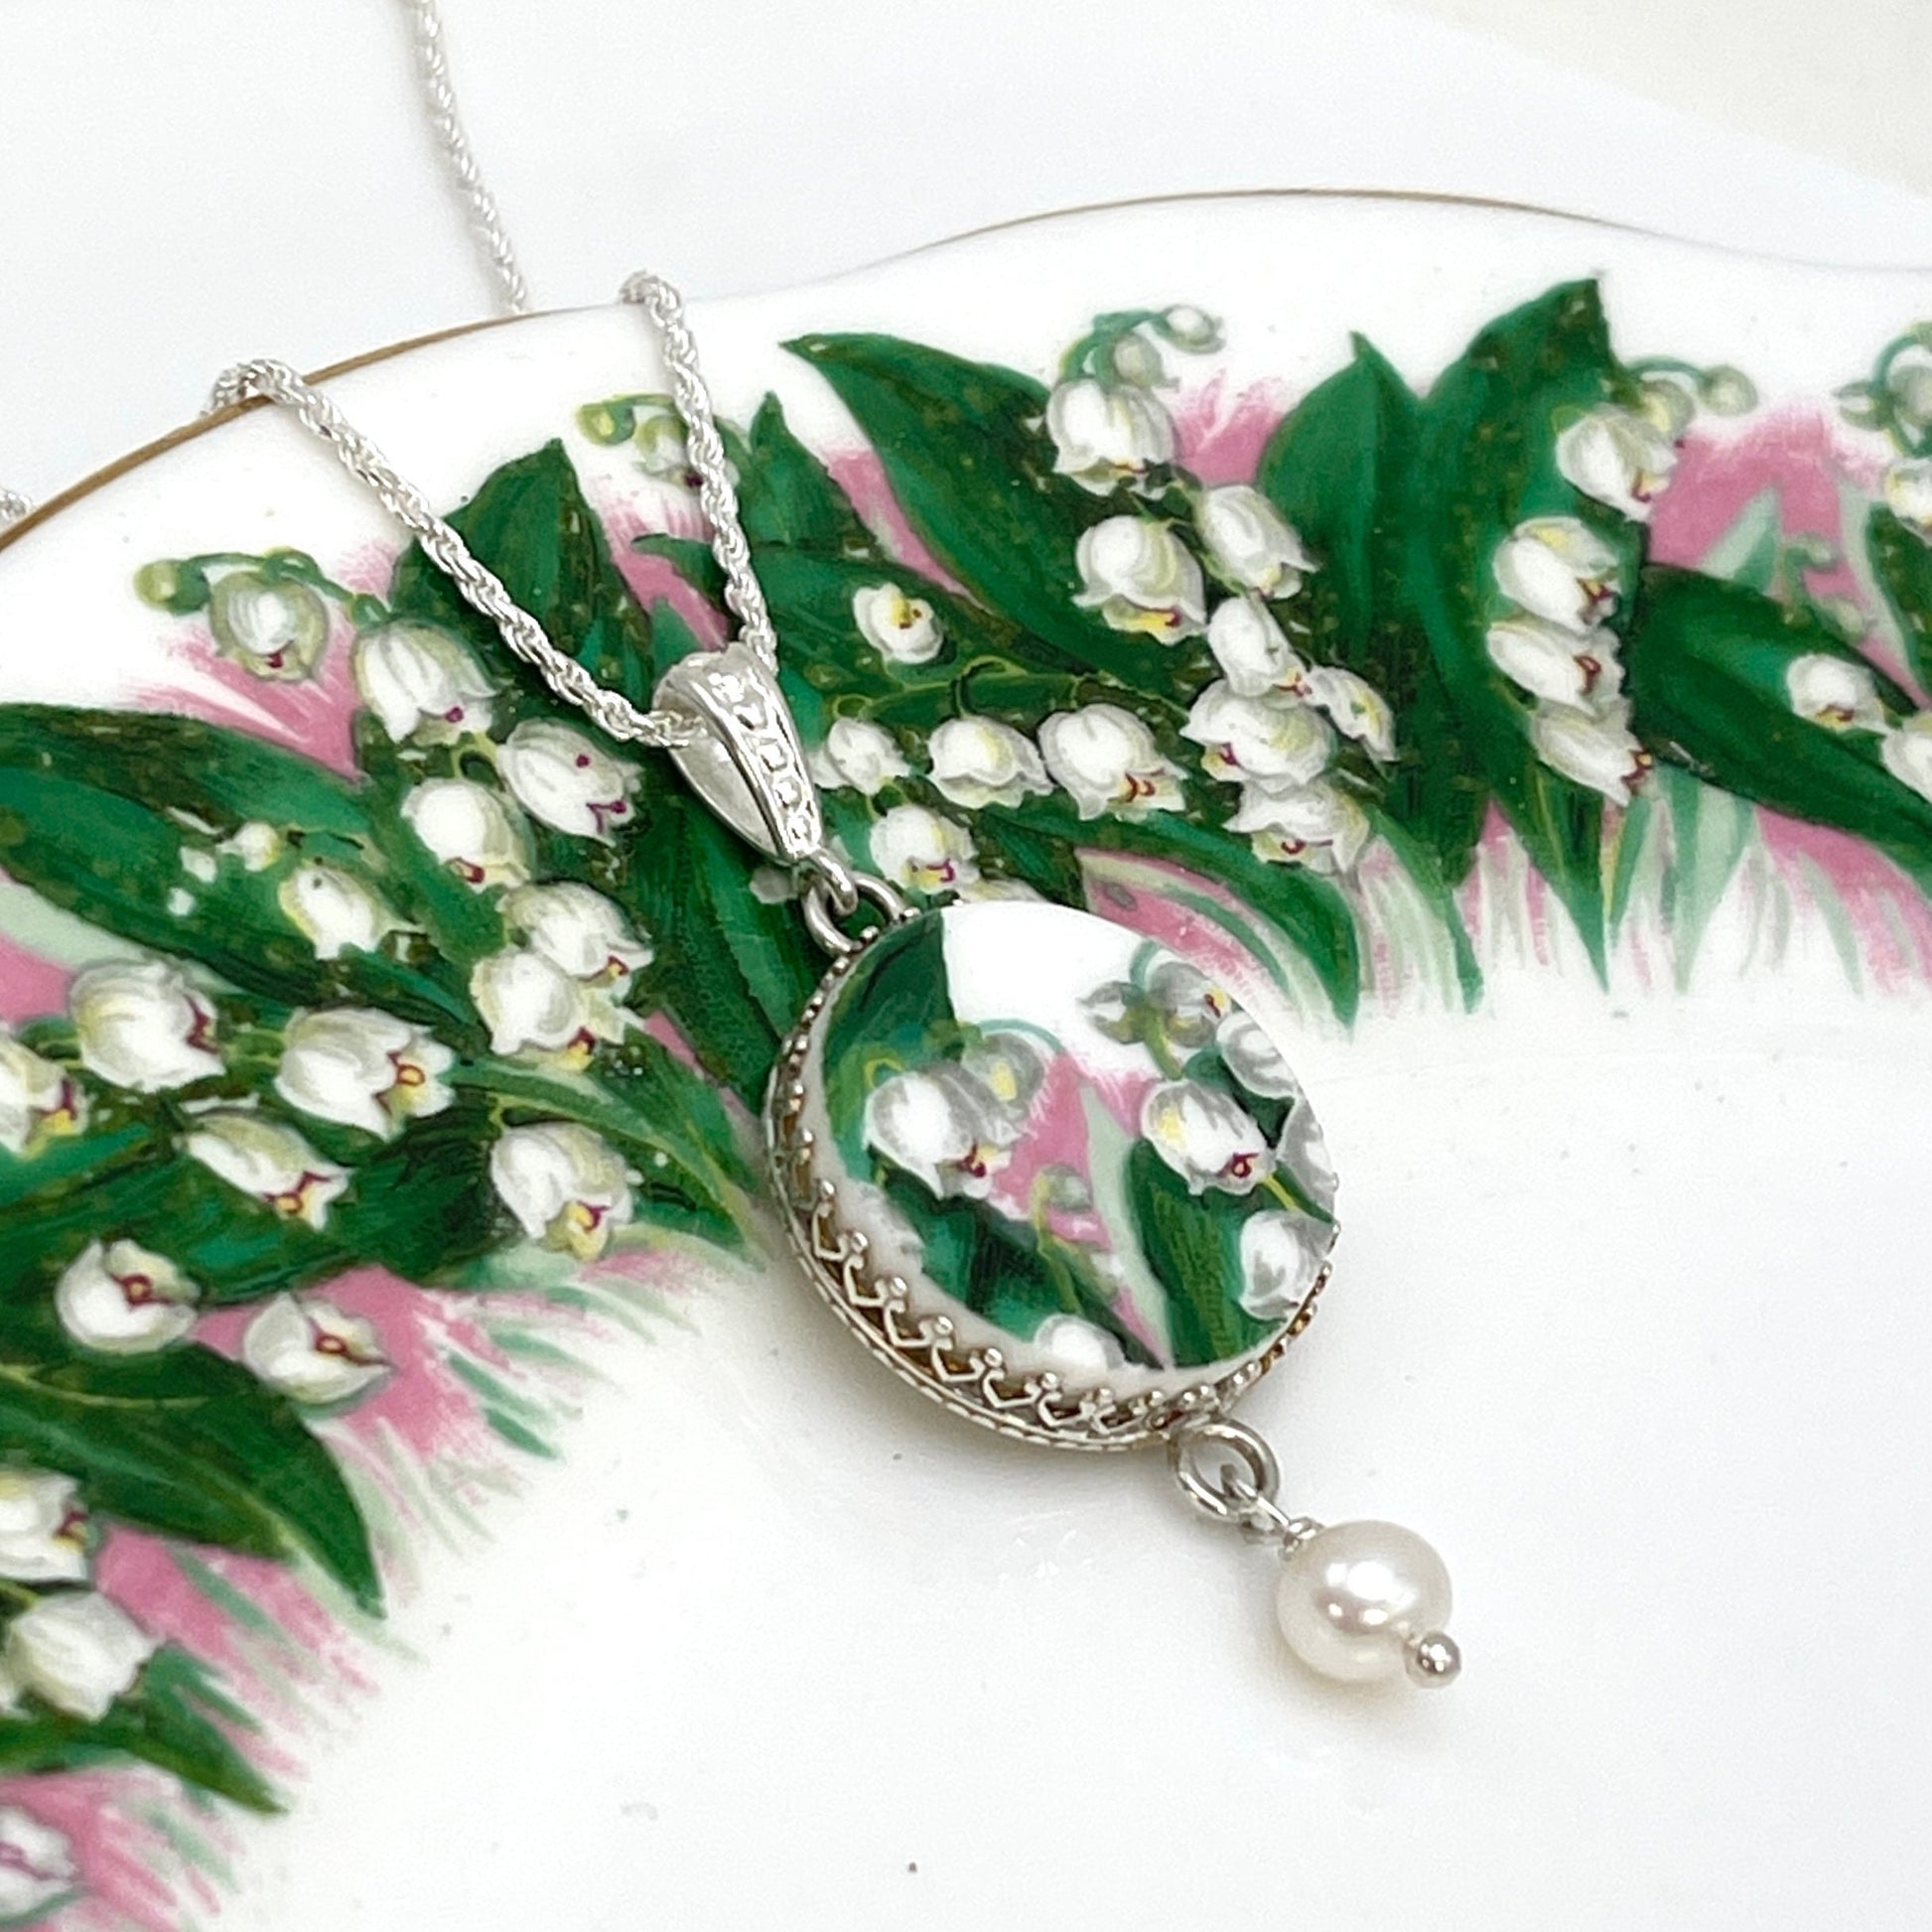 Porcelain Lily of the Valley Necklace, Broken China Jewelry, Unique 18th Anniversary Gifts, Gift for Wife